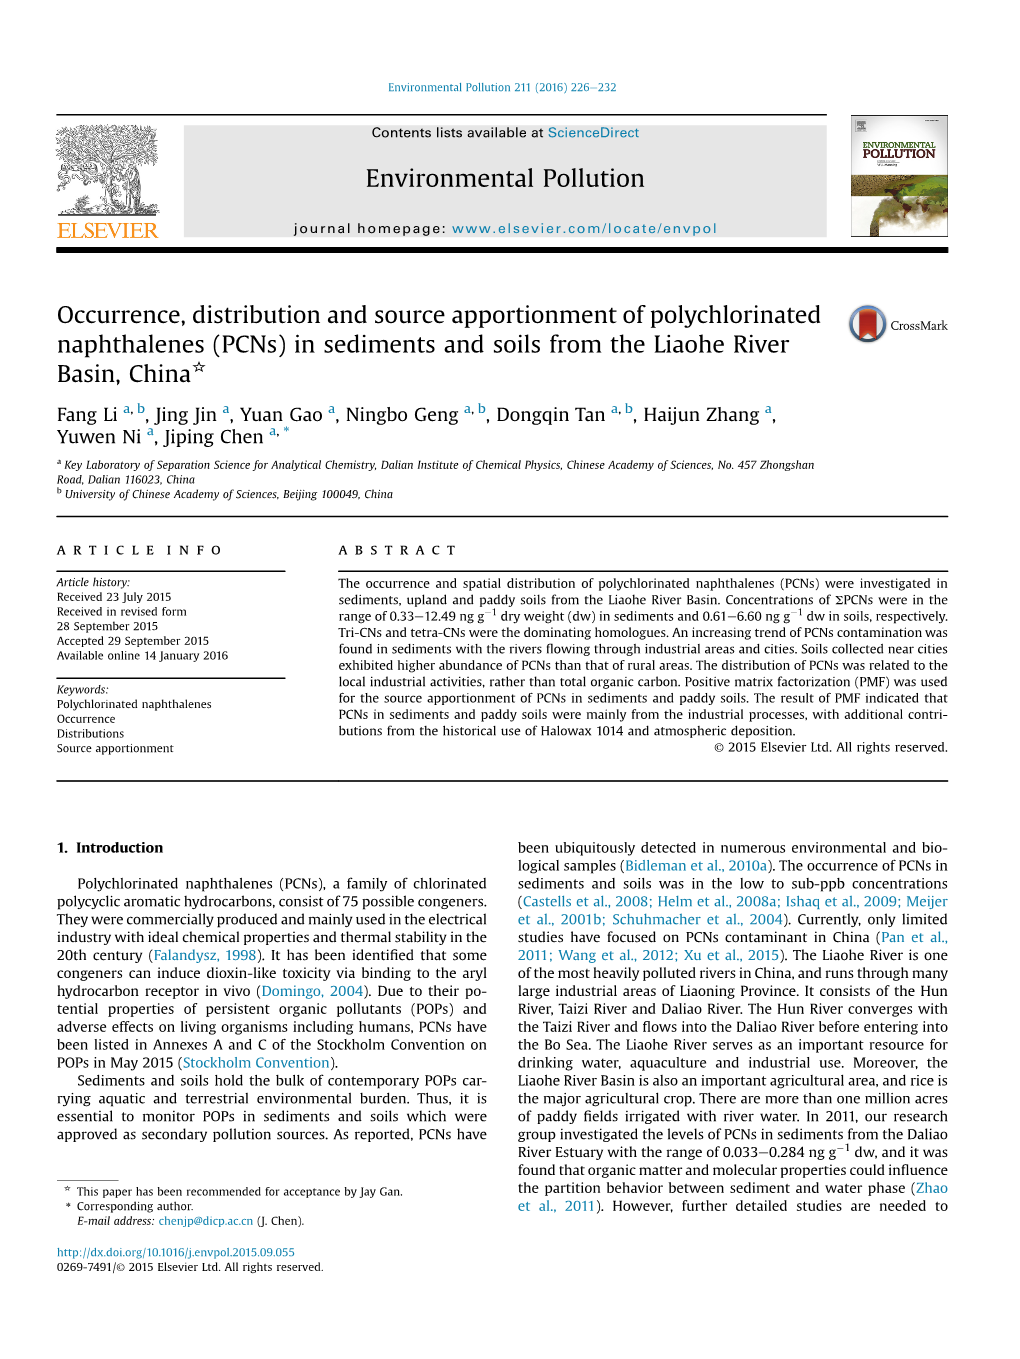 Occurrence, Distribution and Source Apportionment of Polychlorinated Naphthalenes (Pcns) in Sediments and Soils from the Liaohe River Basin, China*